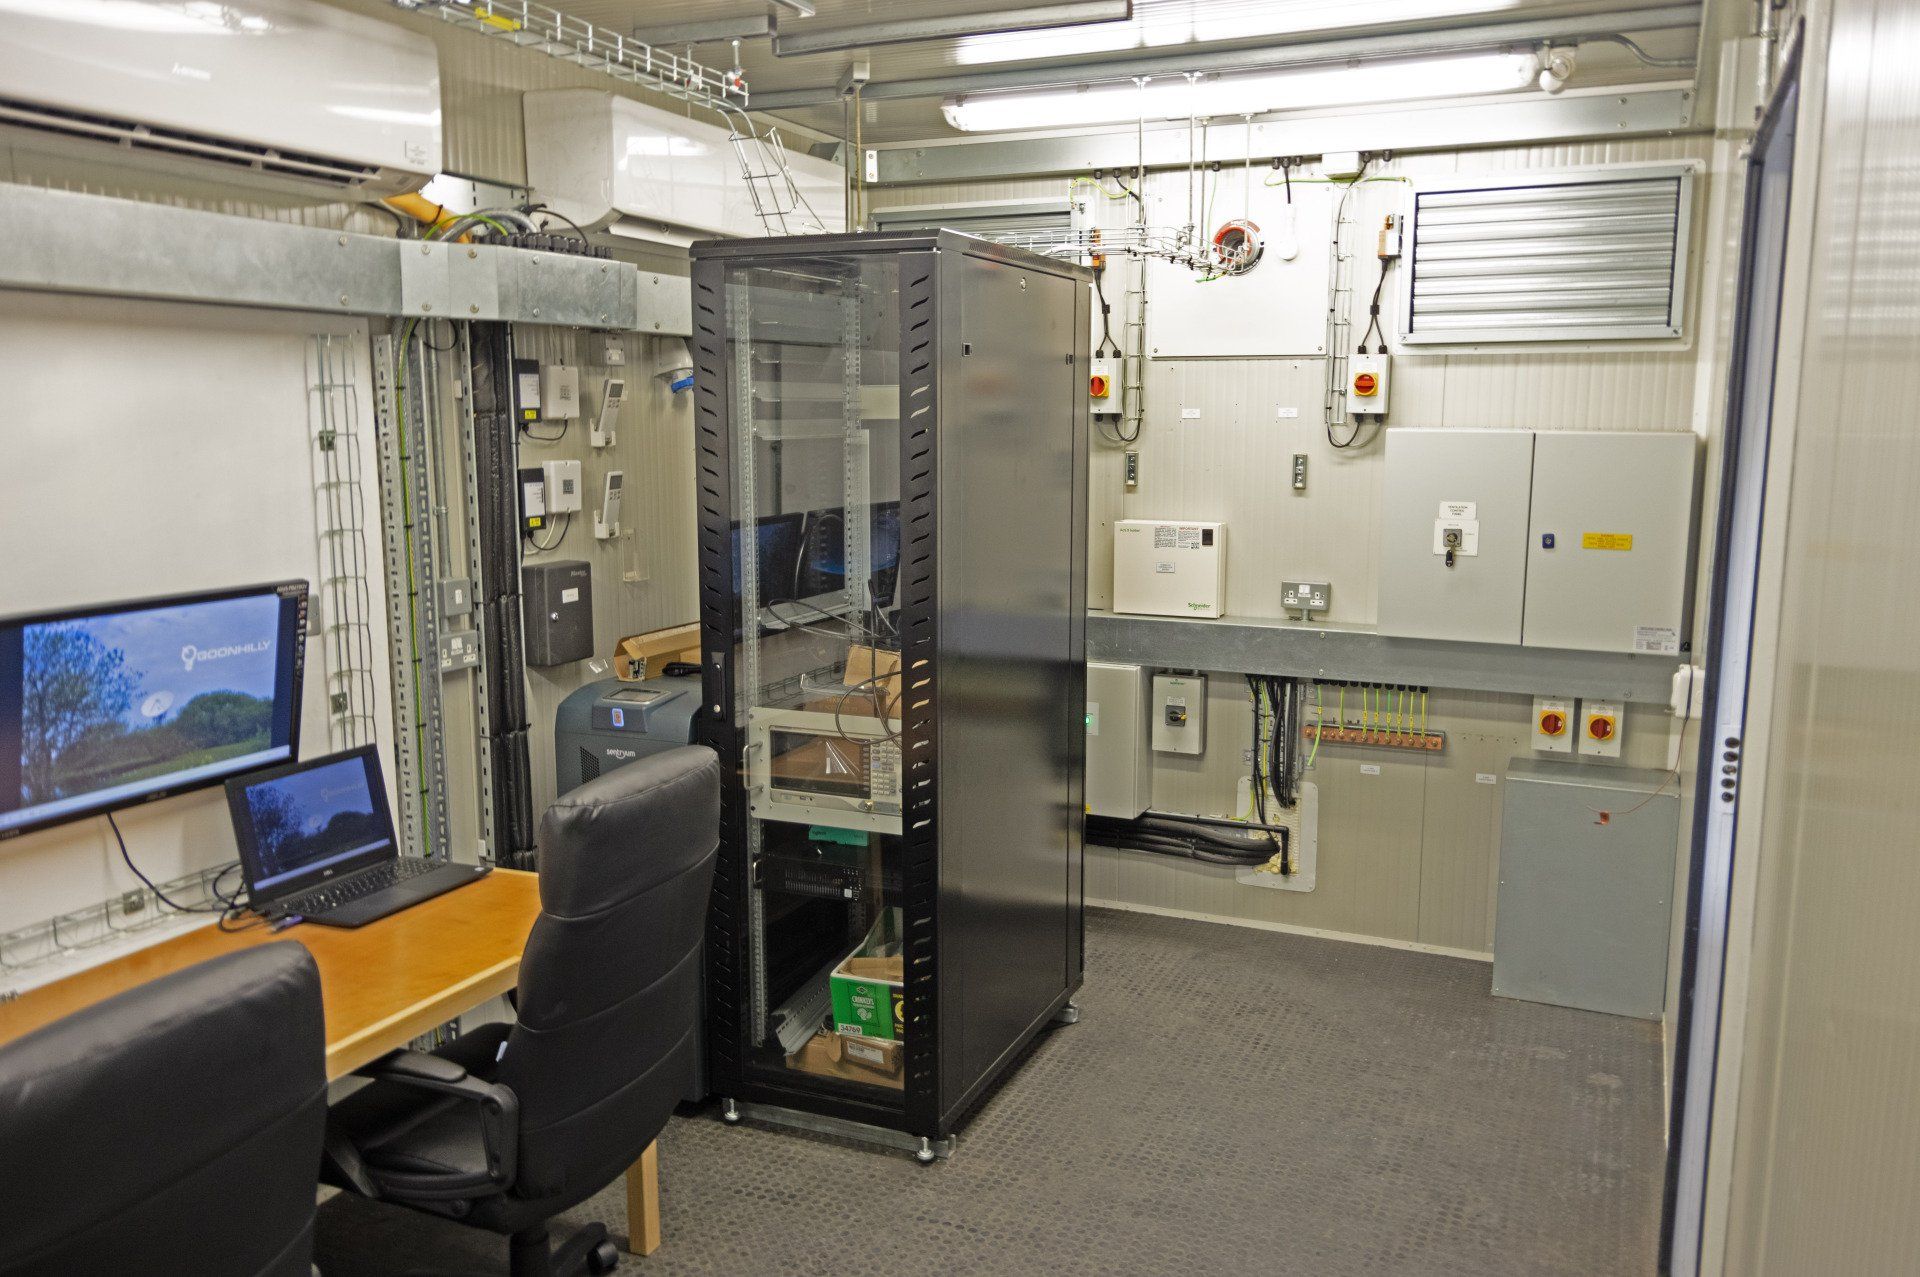 View inside cabin of self-contained ground station